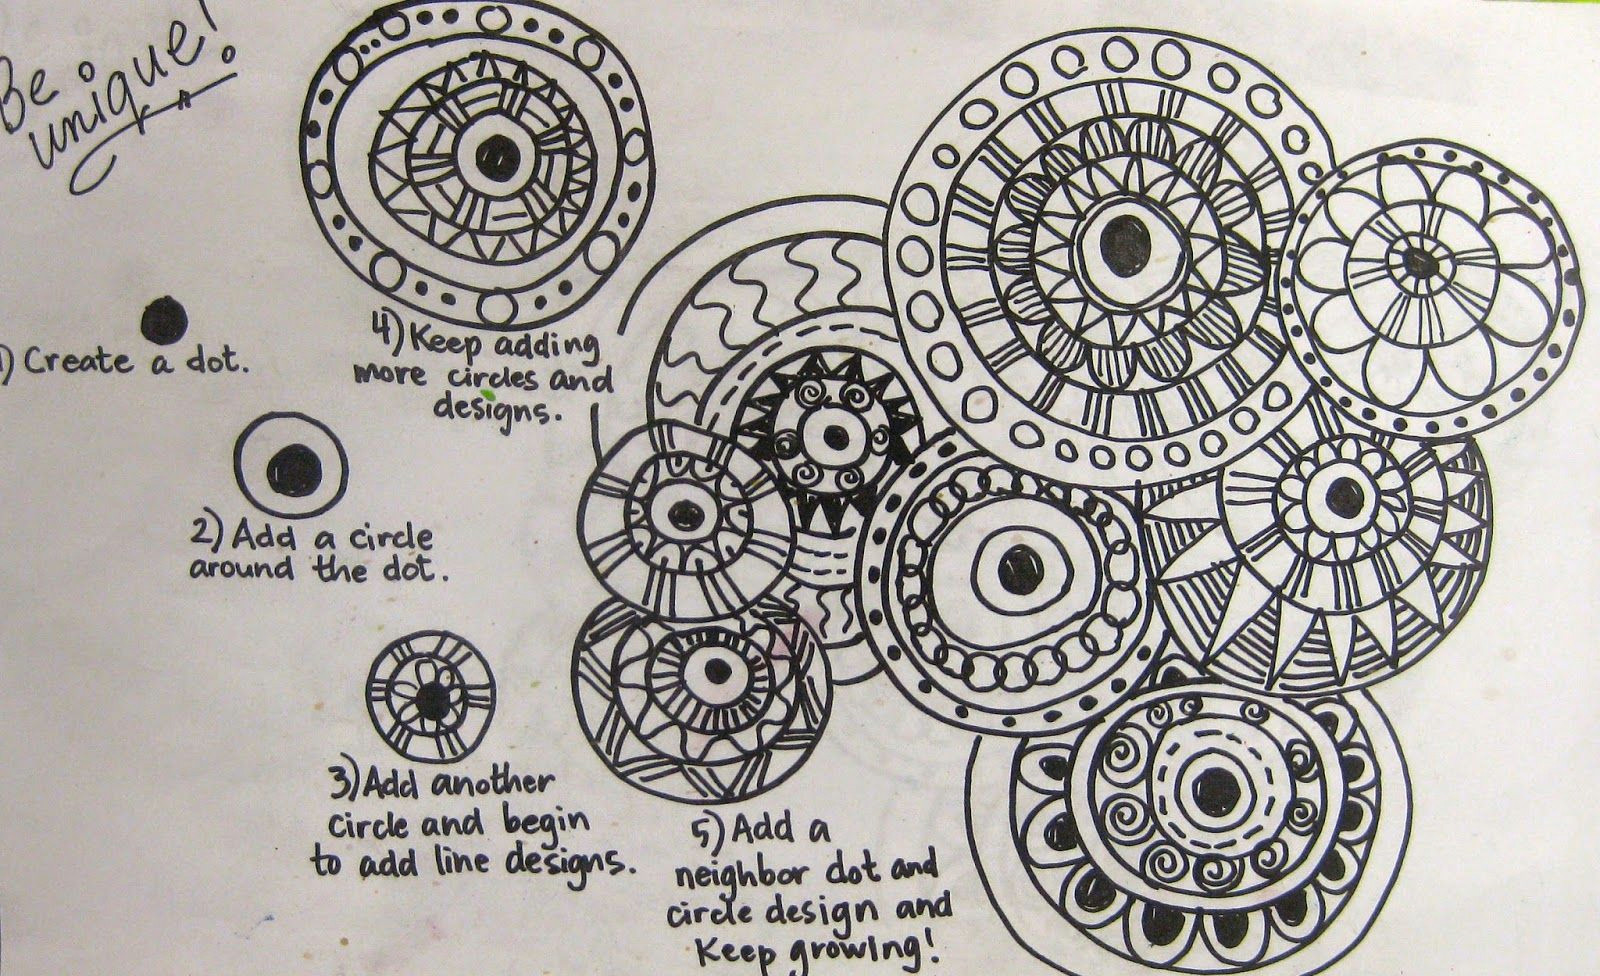 4th grade asked to help with compass drawing unit they can do this as they finish their zentangles